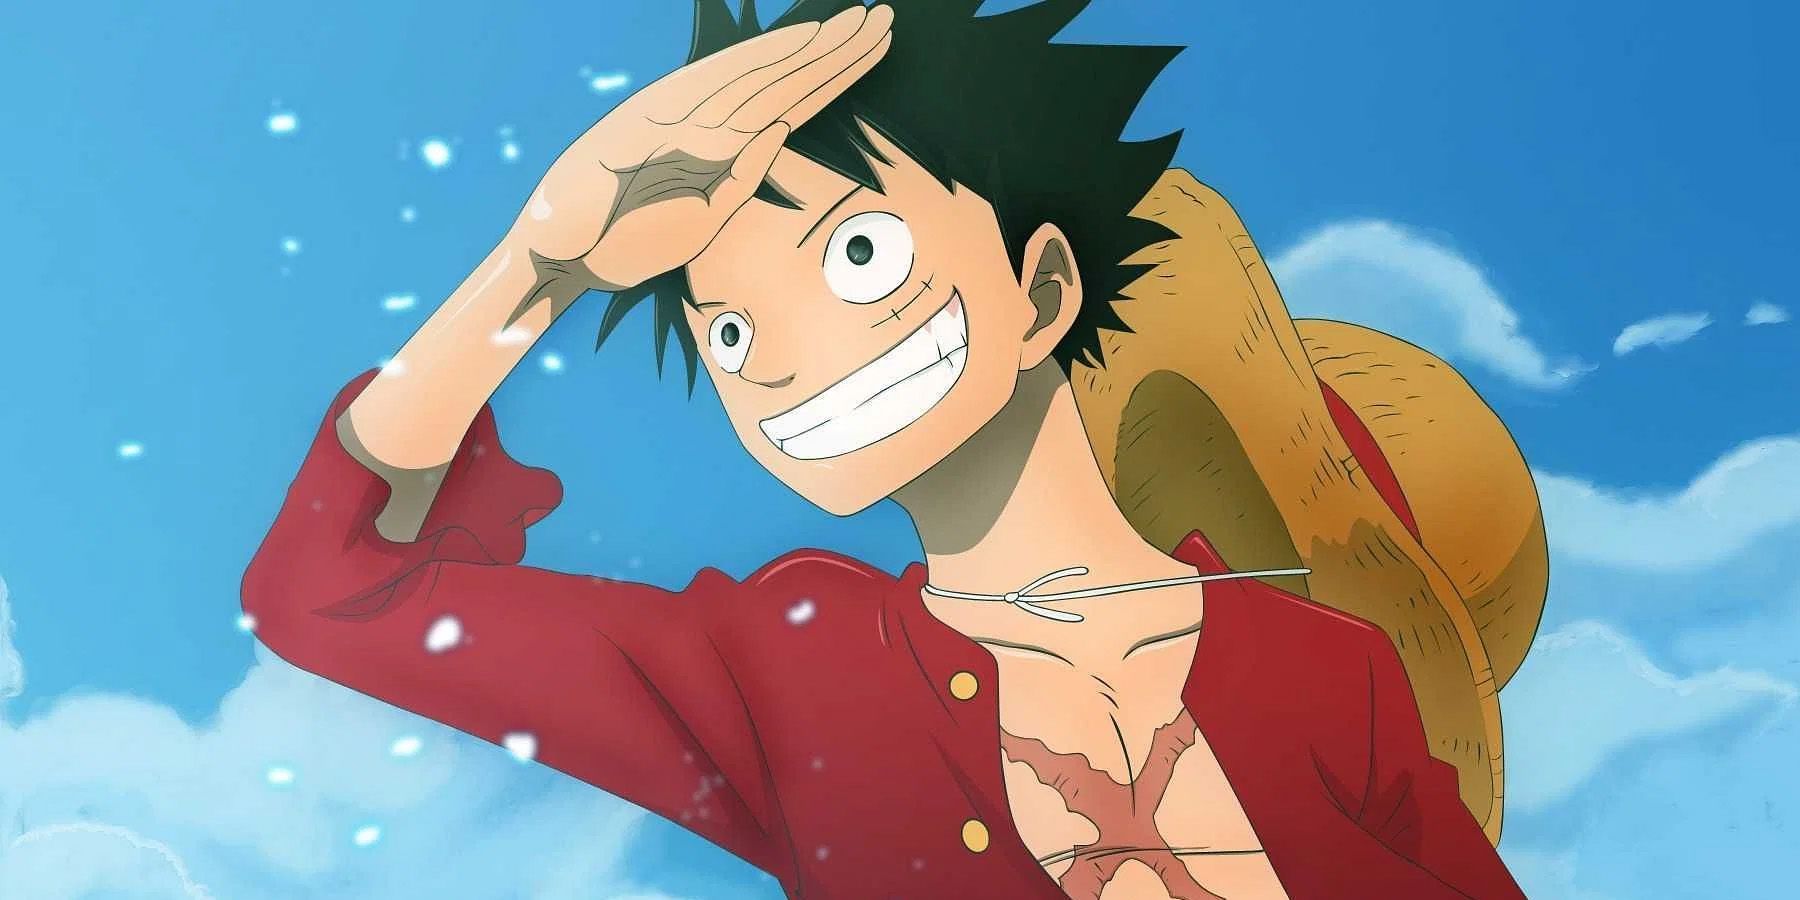 Luffy of One Piece